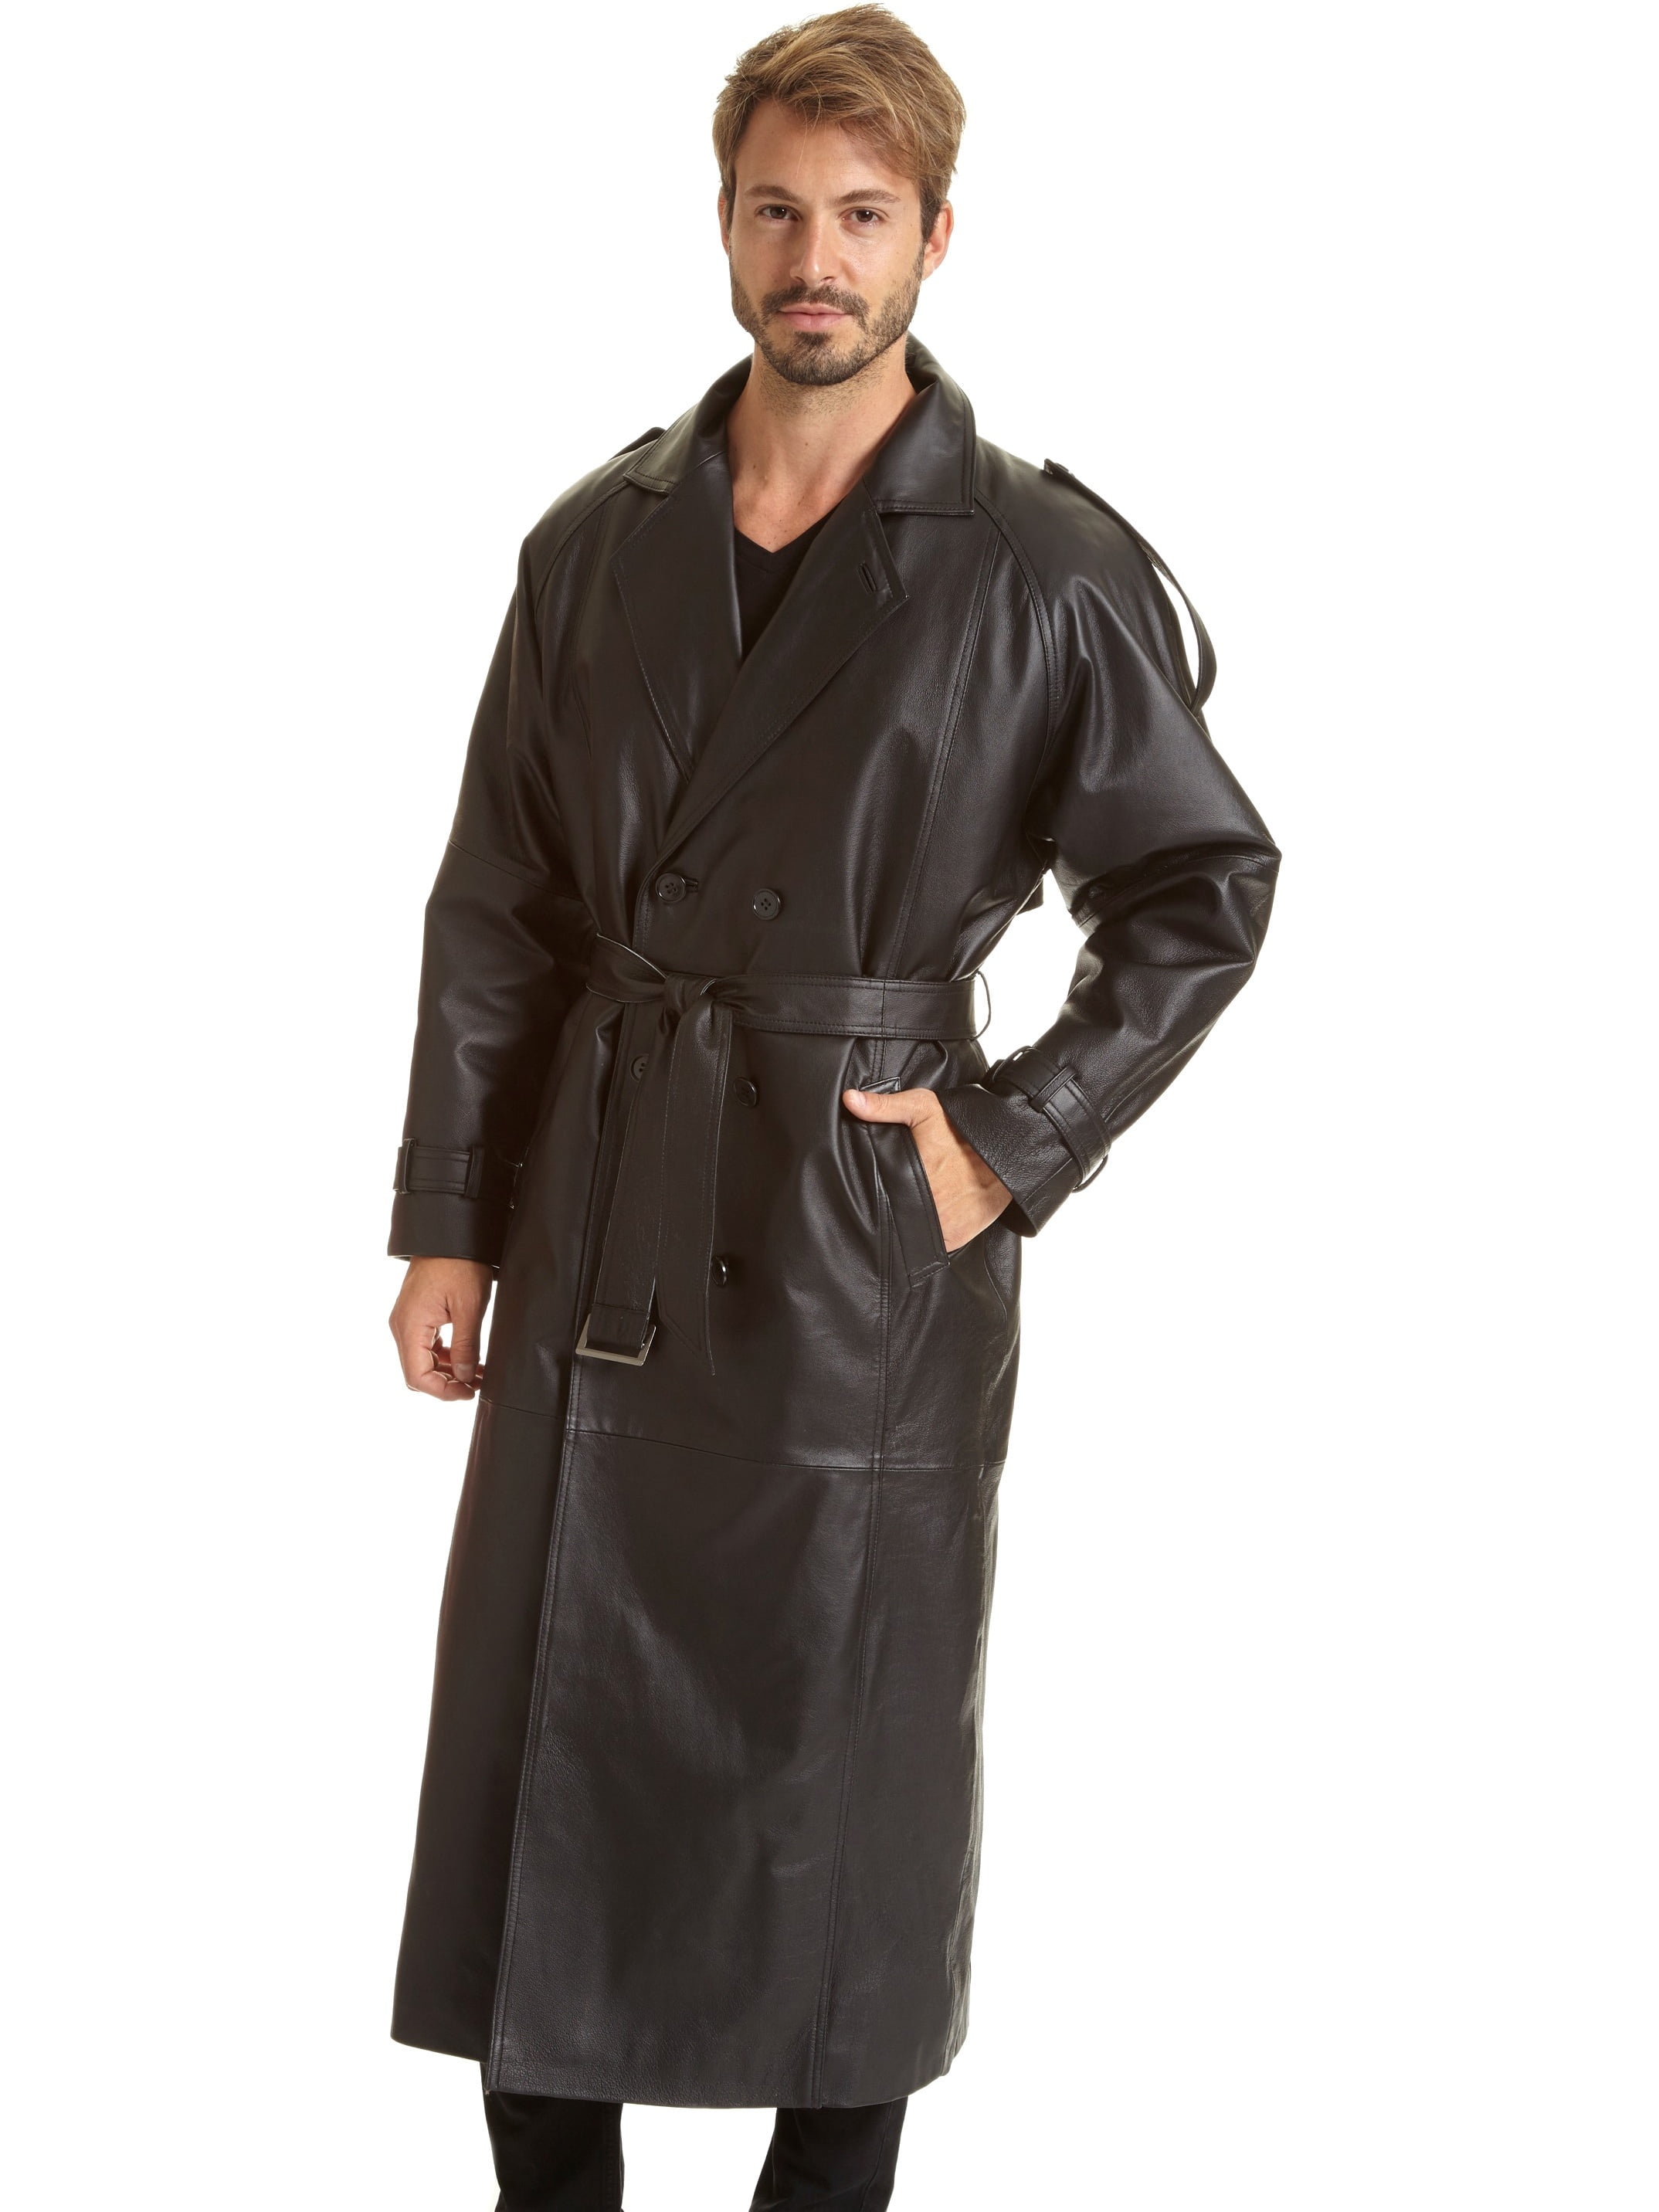 Excelled Mens Leather Trench Coat - Walmart.com